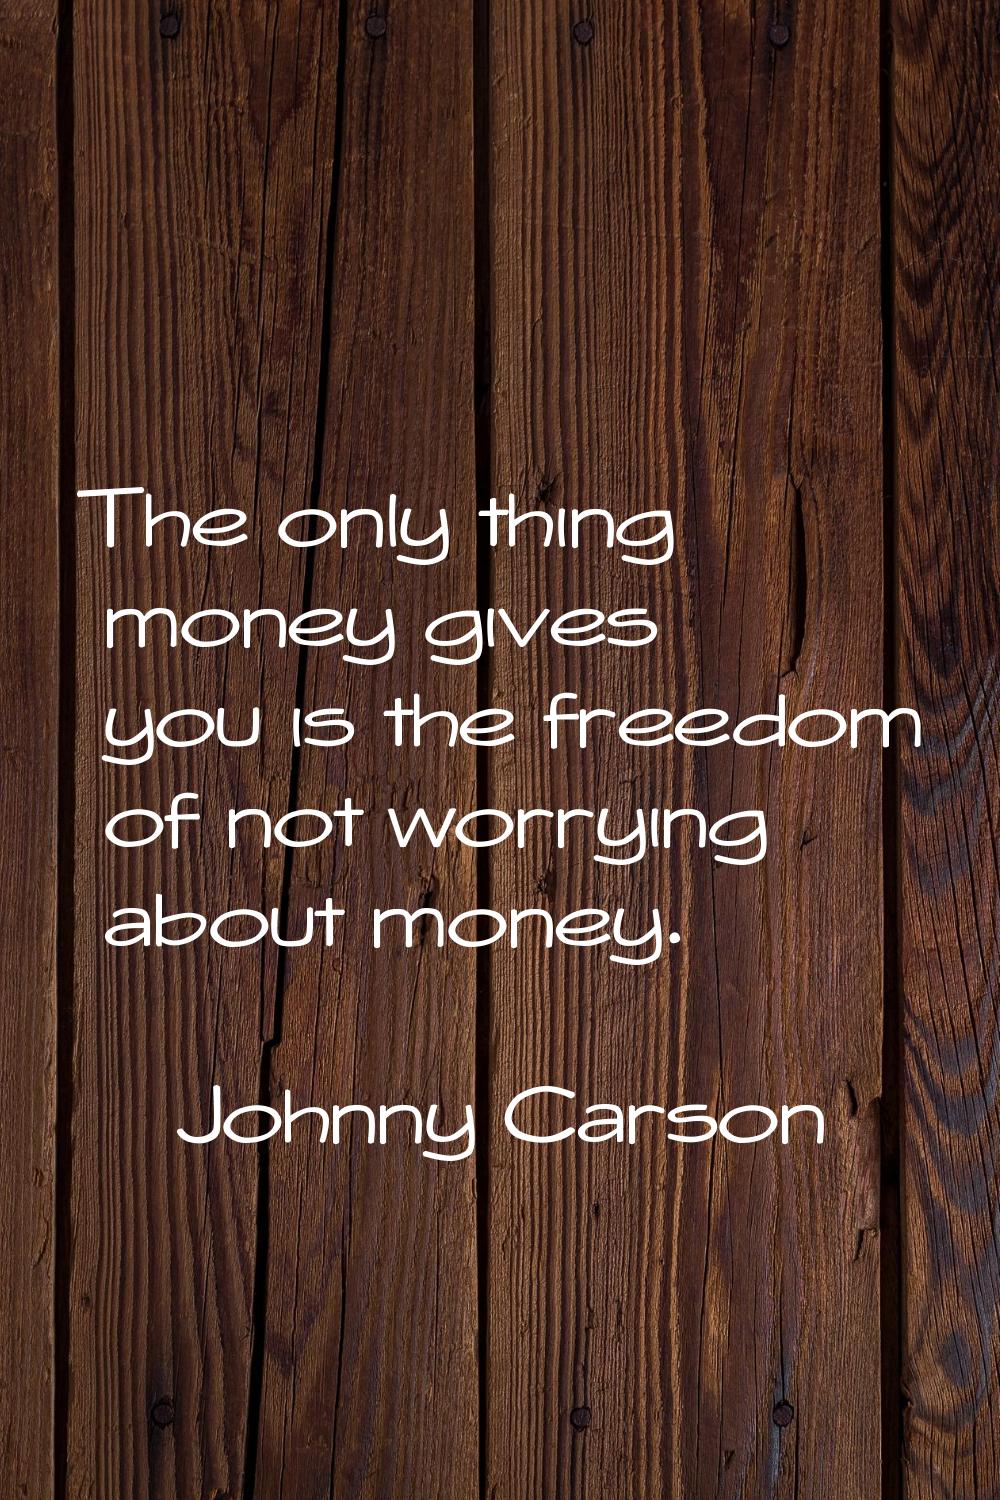 The only thing money gives you is the freedom of not worrying about money.